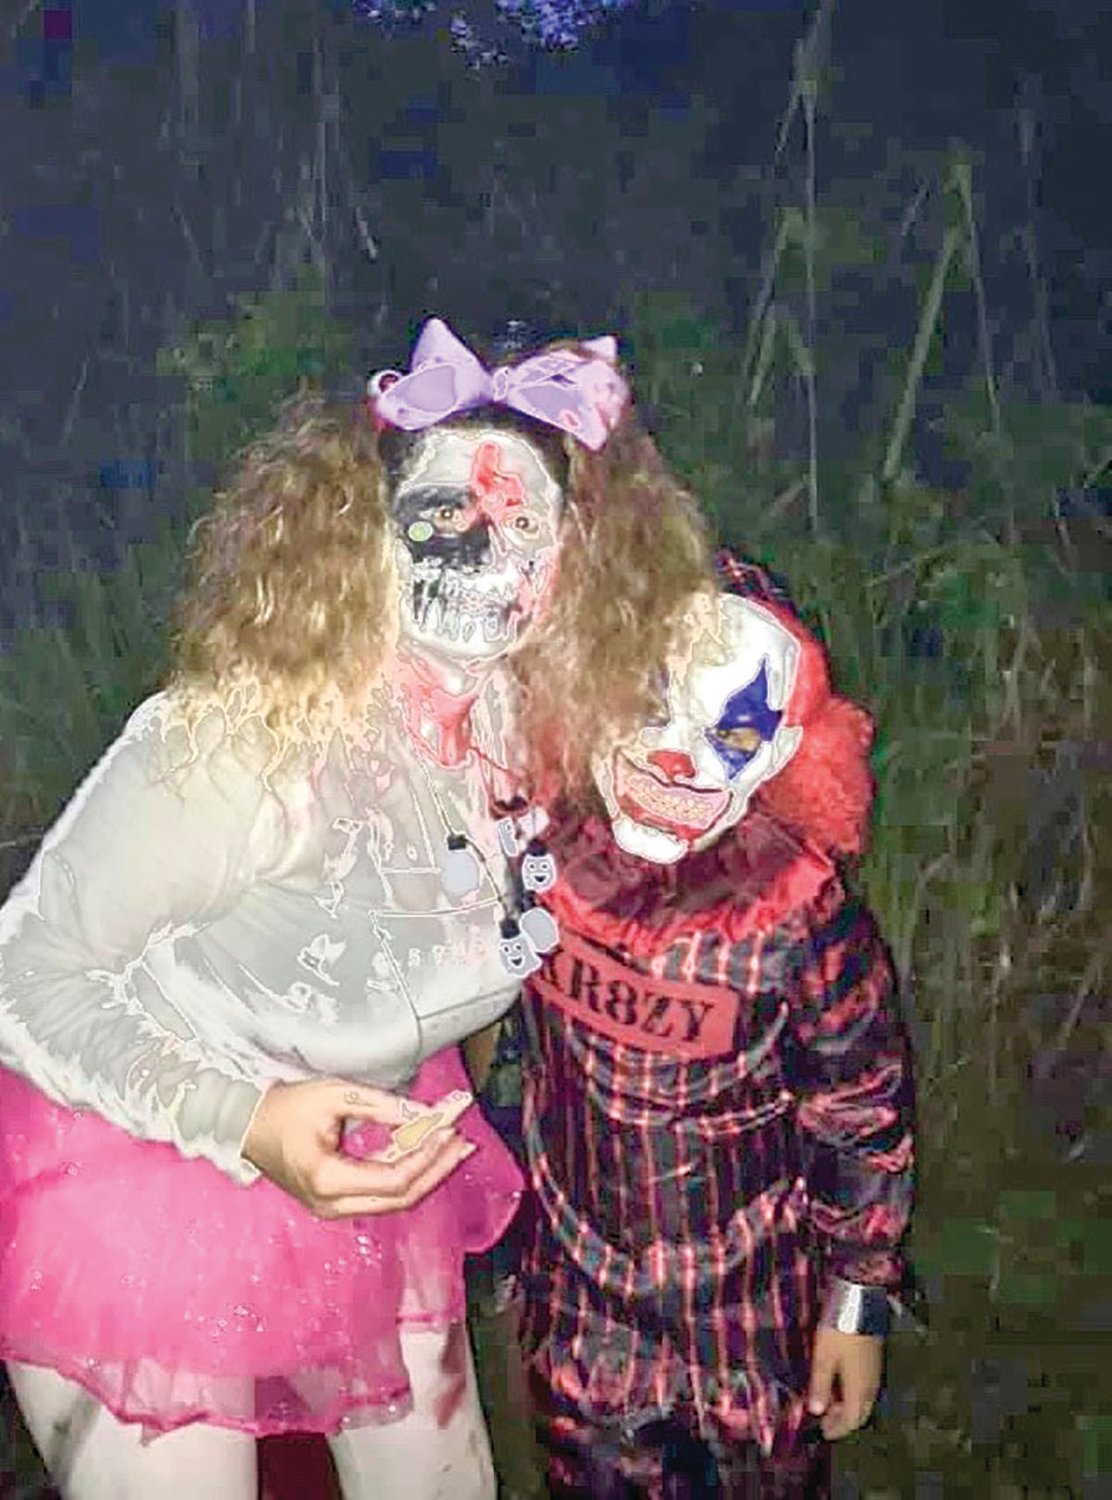 LABELLE — These are two of the creatures that will be lurking along the trail of terror during Hendry County’s annual Haunted Hayride.